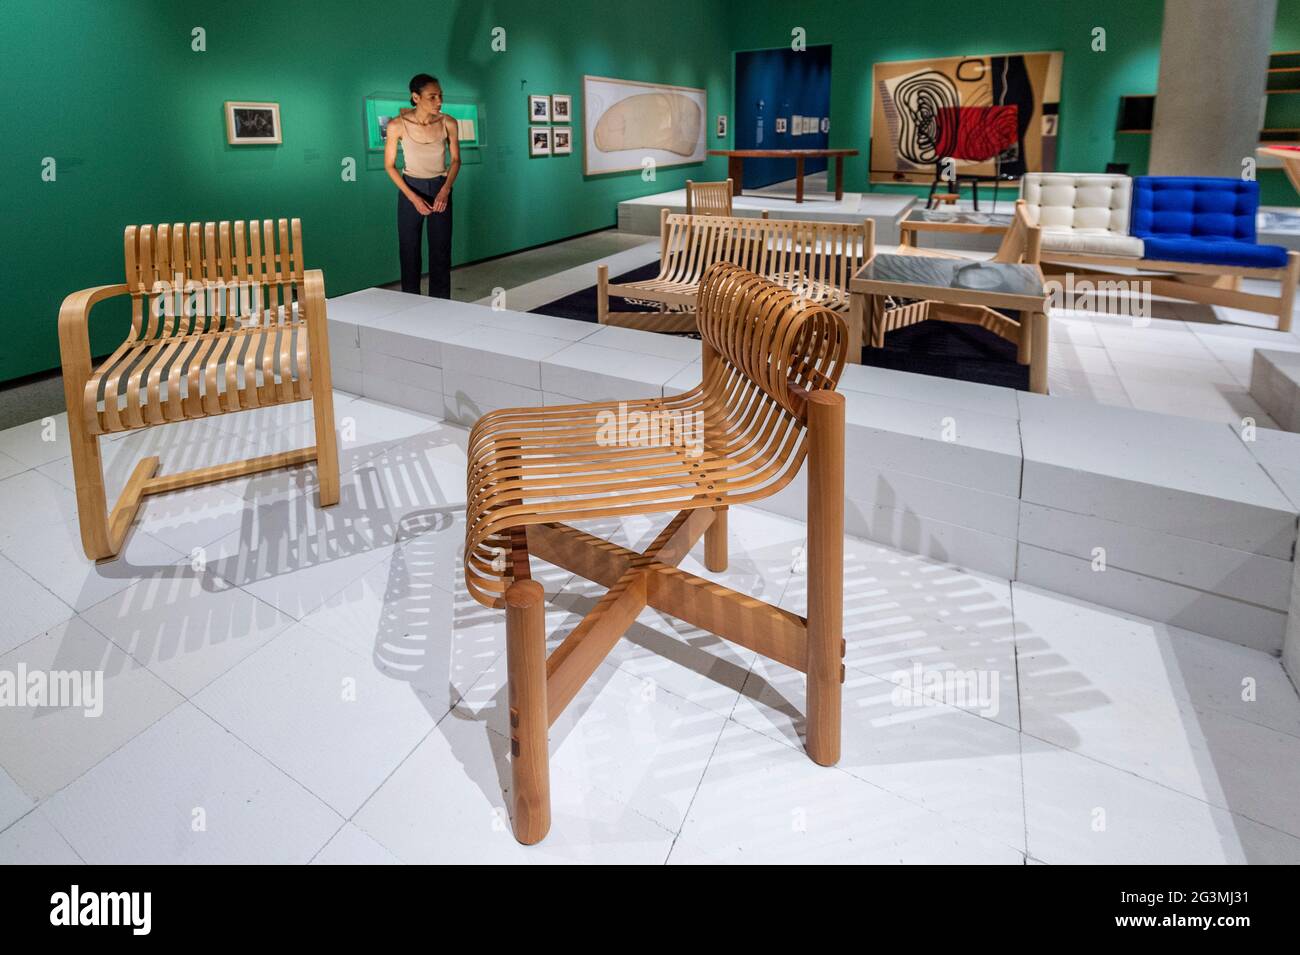 London, UK.  17 June 2021. 'Cantilever bamboo chair', 1940. Preview of “Charlotte Perriand: The Modern Life” exhibition at the Design Museum in Kensington. Charlotte Perriand’s (1903-1999) pioneering furniture designs shaped the 20th century and helped define the modern interior.  The exhibition marks the 25th anniversary of her first exhibition at the Design Museum in 1996 and runs 19 June to 5 September 2021. Credit: Stephen Chung / Alamy Live News Stock Photo